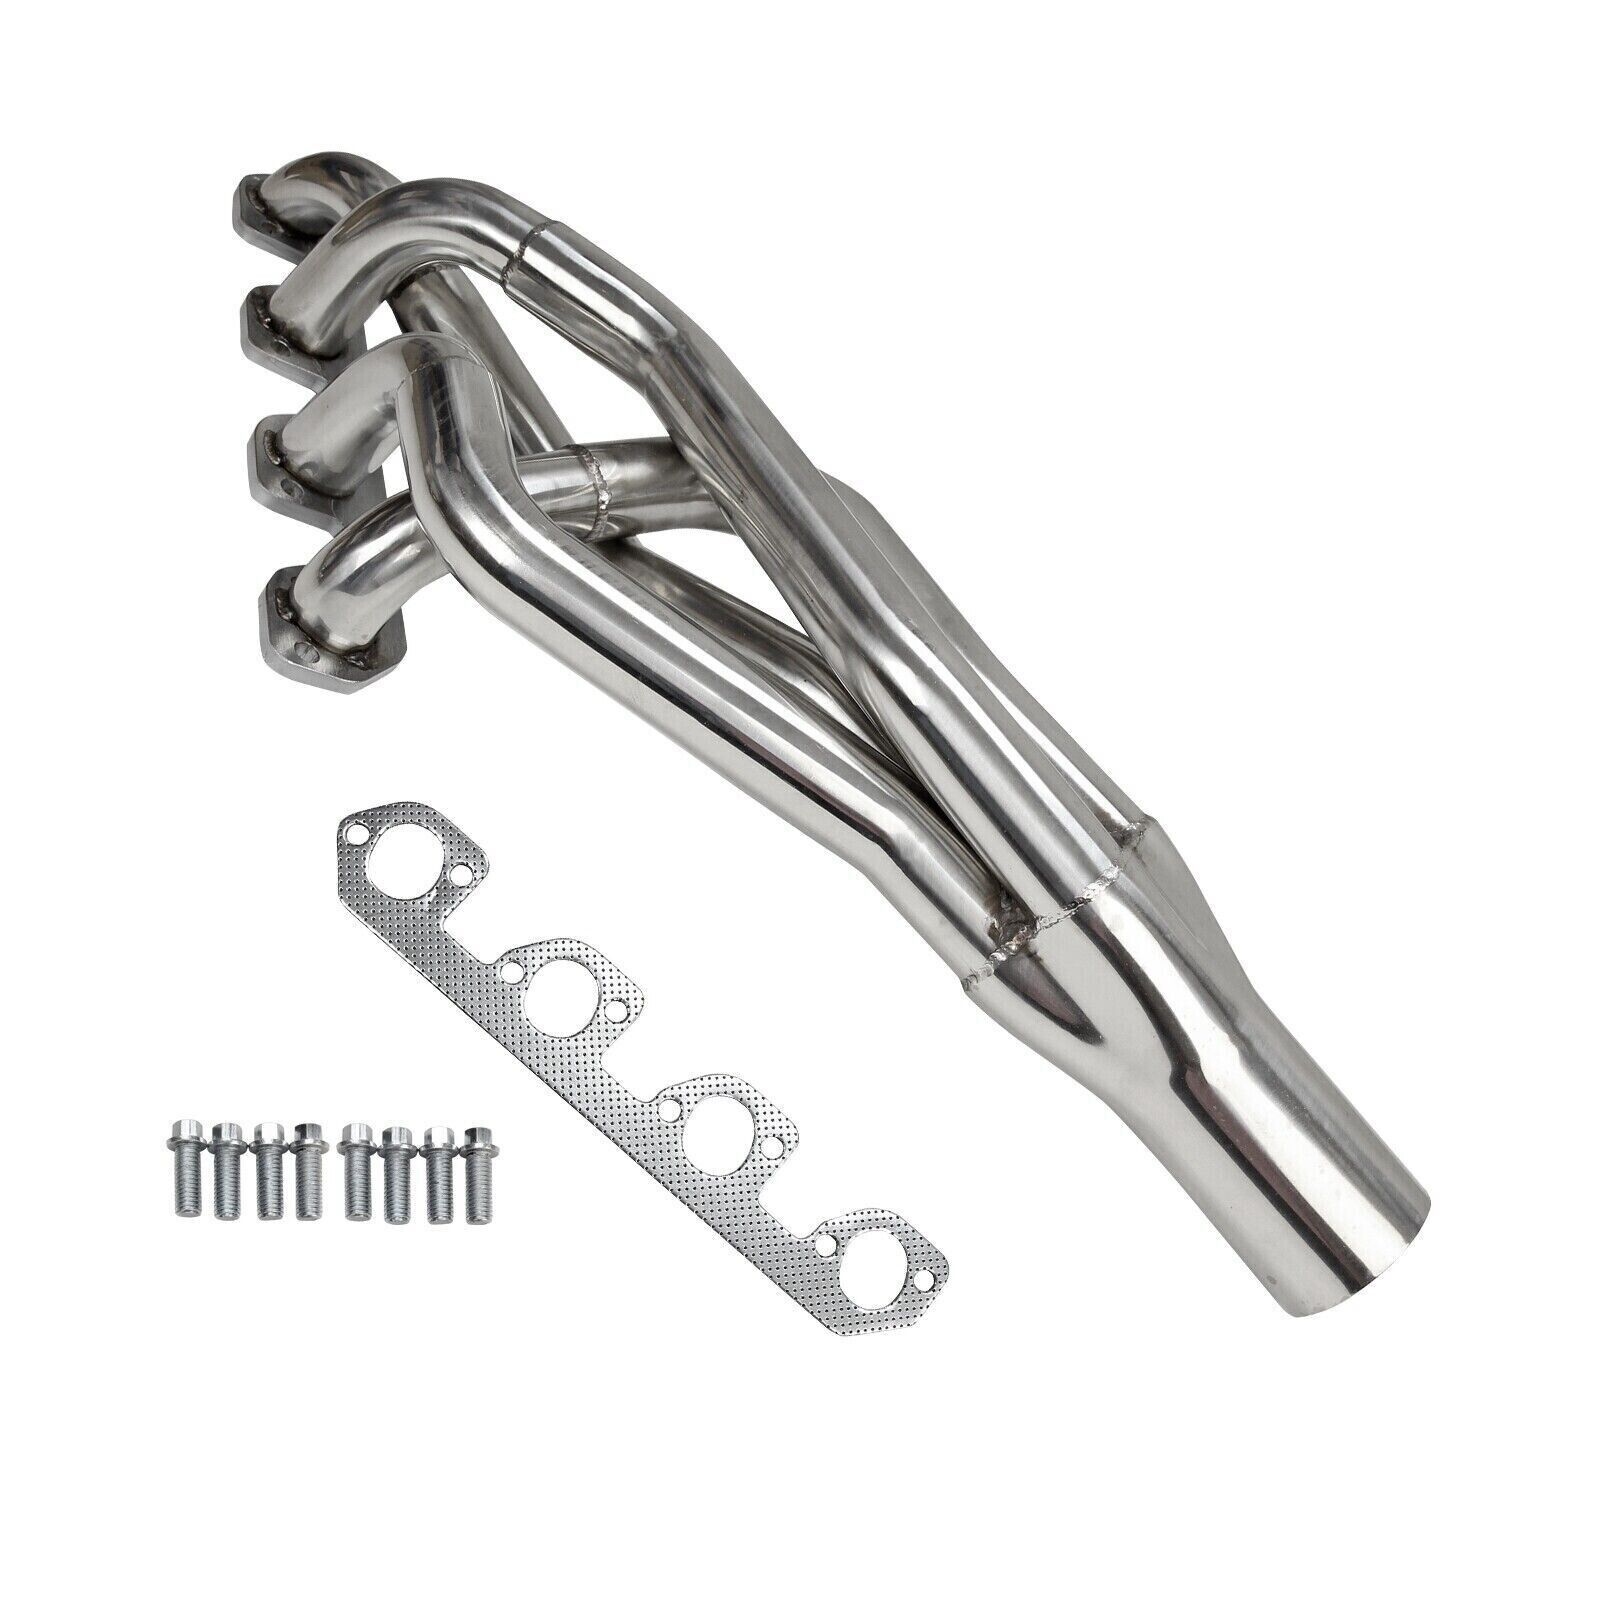 For 74-80 Ford Pinto 82-92 Ranger 2.3L Pro Stainless Steel Manifold Headers New